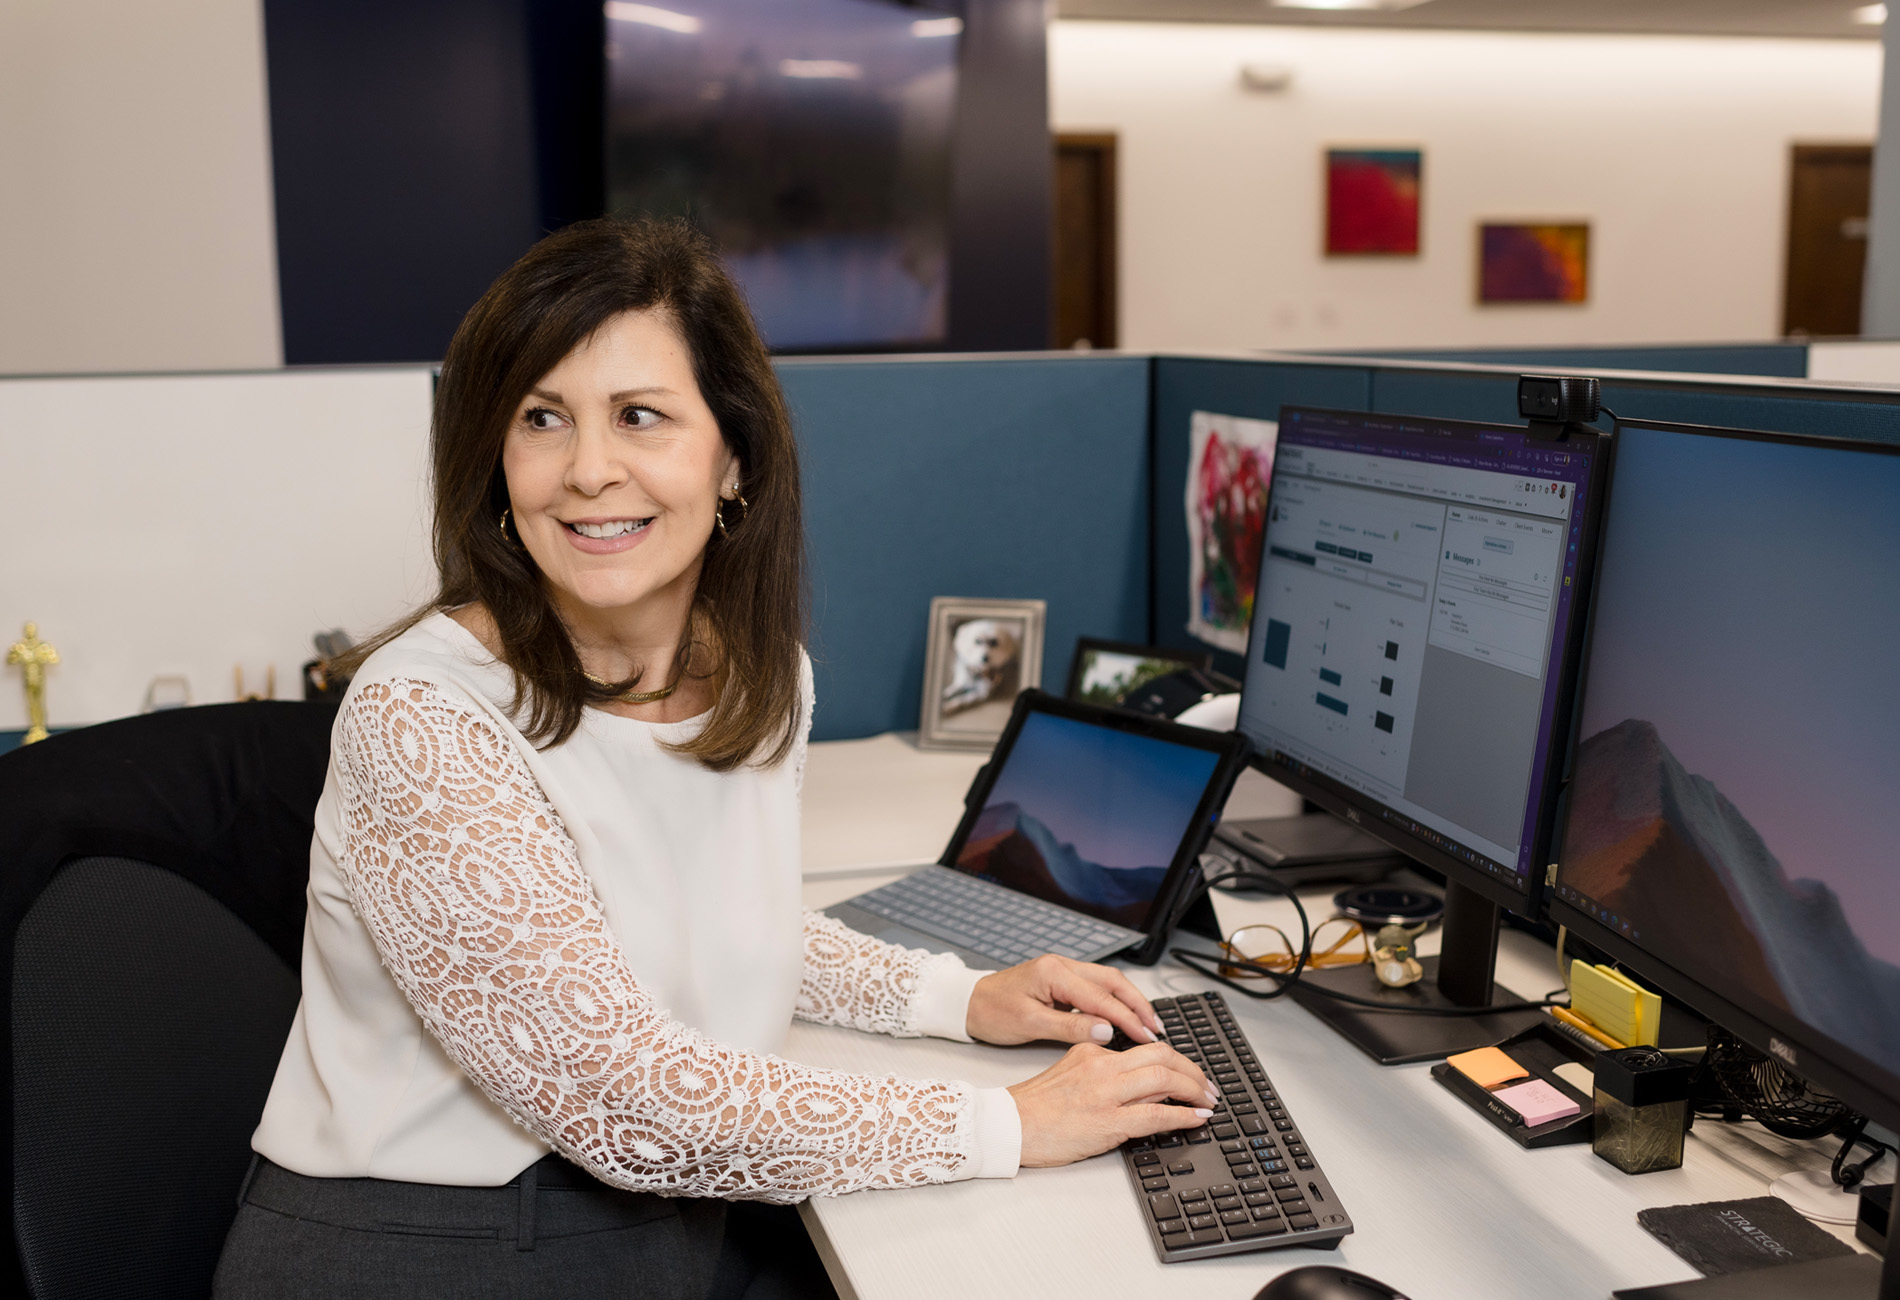 Paula Rizzo, Senior Client Service Specialist: A woman with long brown hair and a white blouse working at her computer.